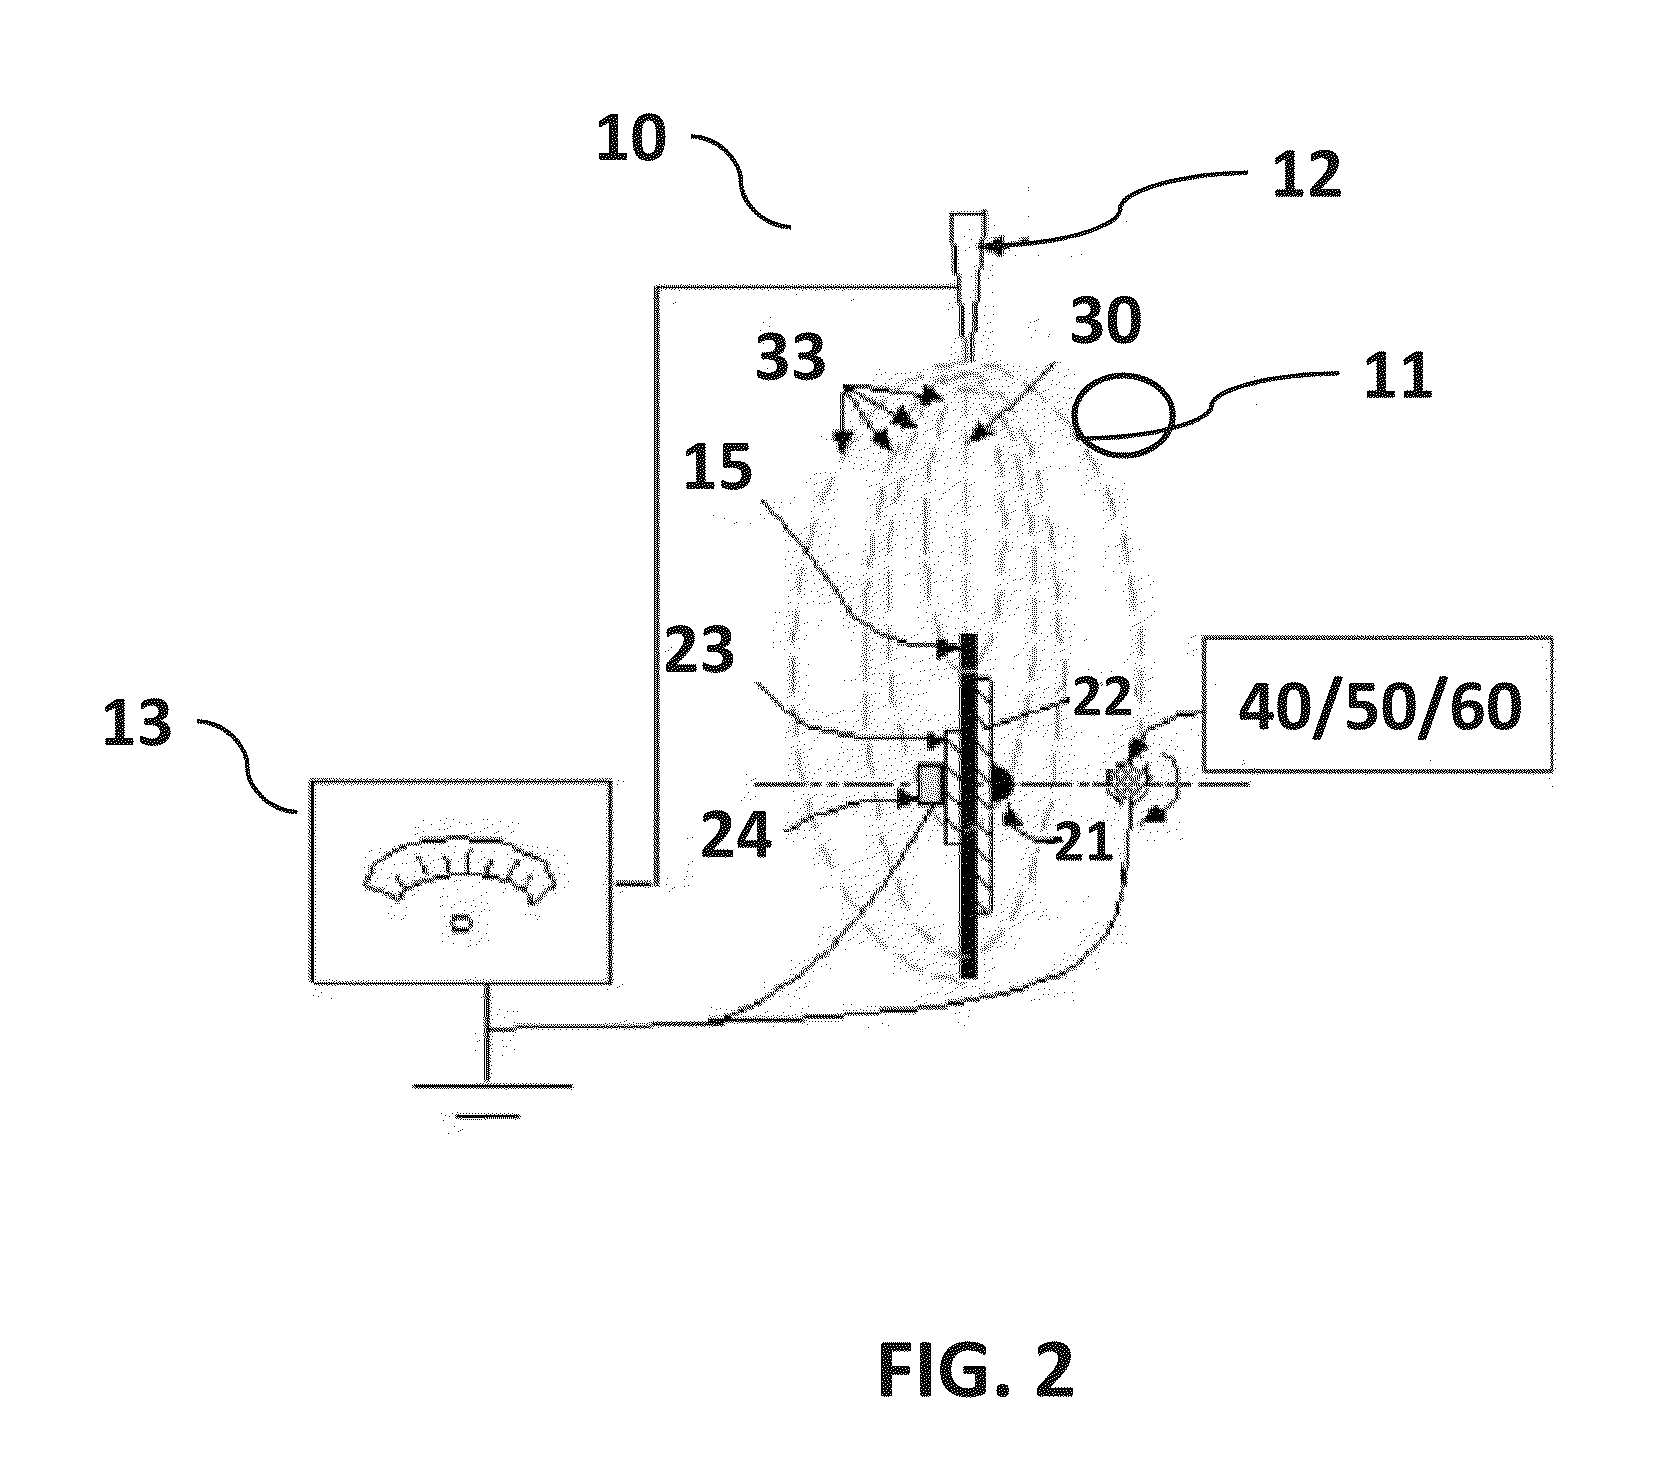 Method and apparatus for controlled alignment and deposition of branched electrospun fiber